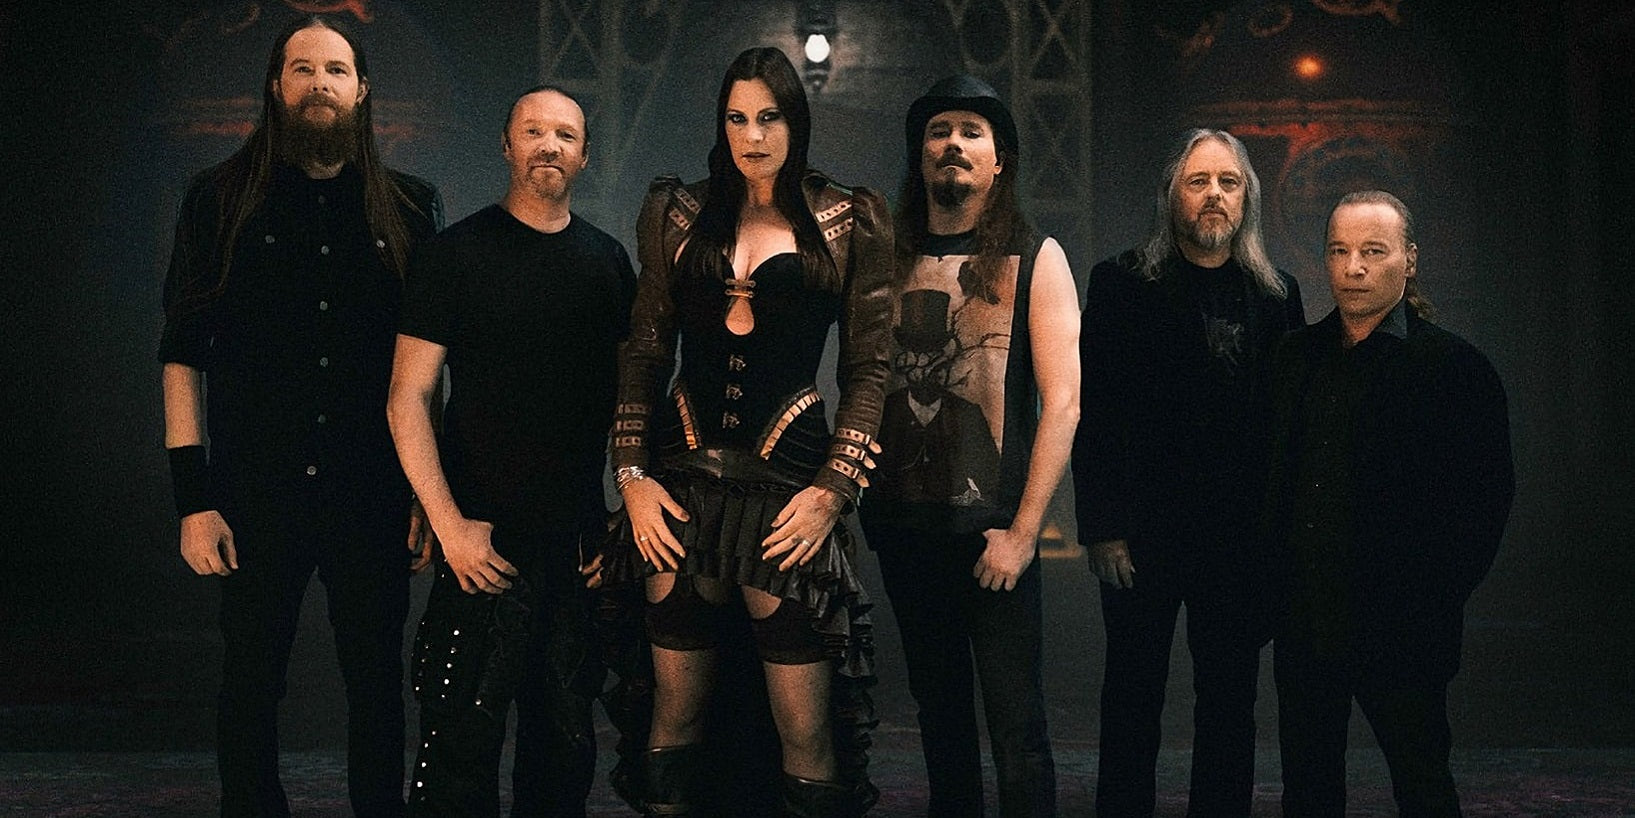 Nightwish: About Their Tour Break And The New Album “Yesterwynde”